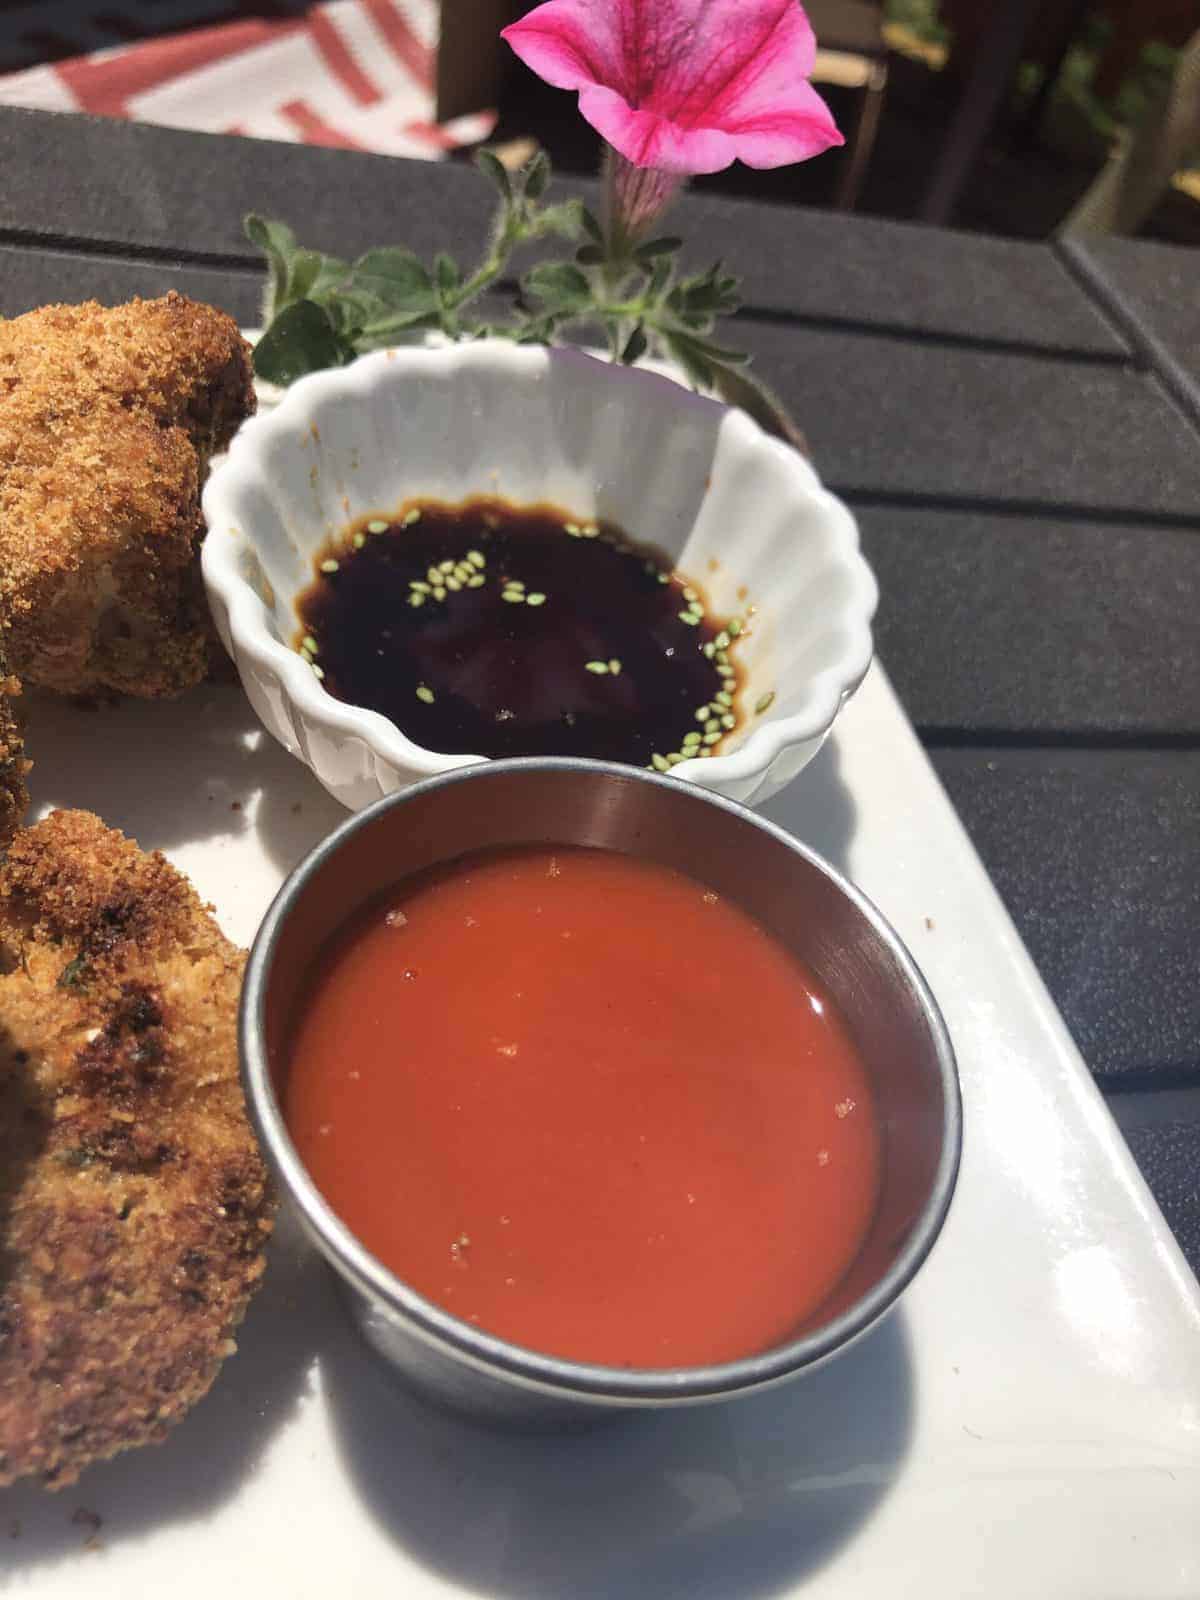  A dipping bowl of Hot Sauce and Soy Sauce on a white plate with baked cauliflower fritters